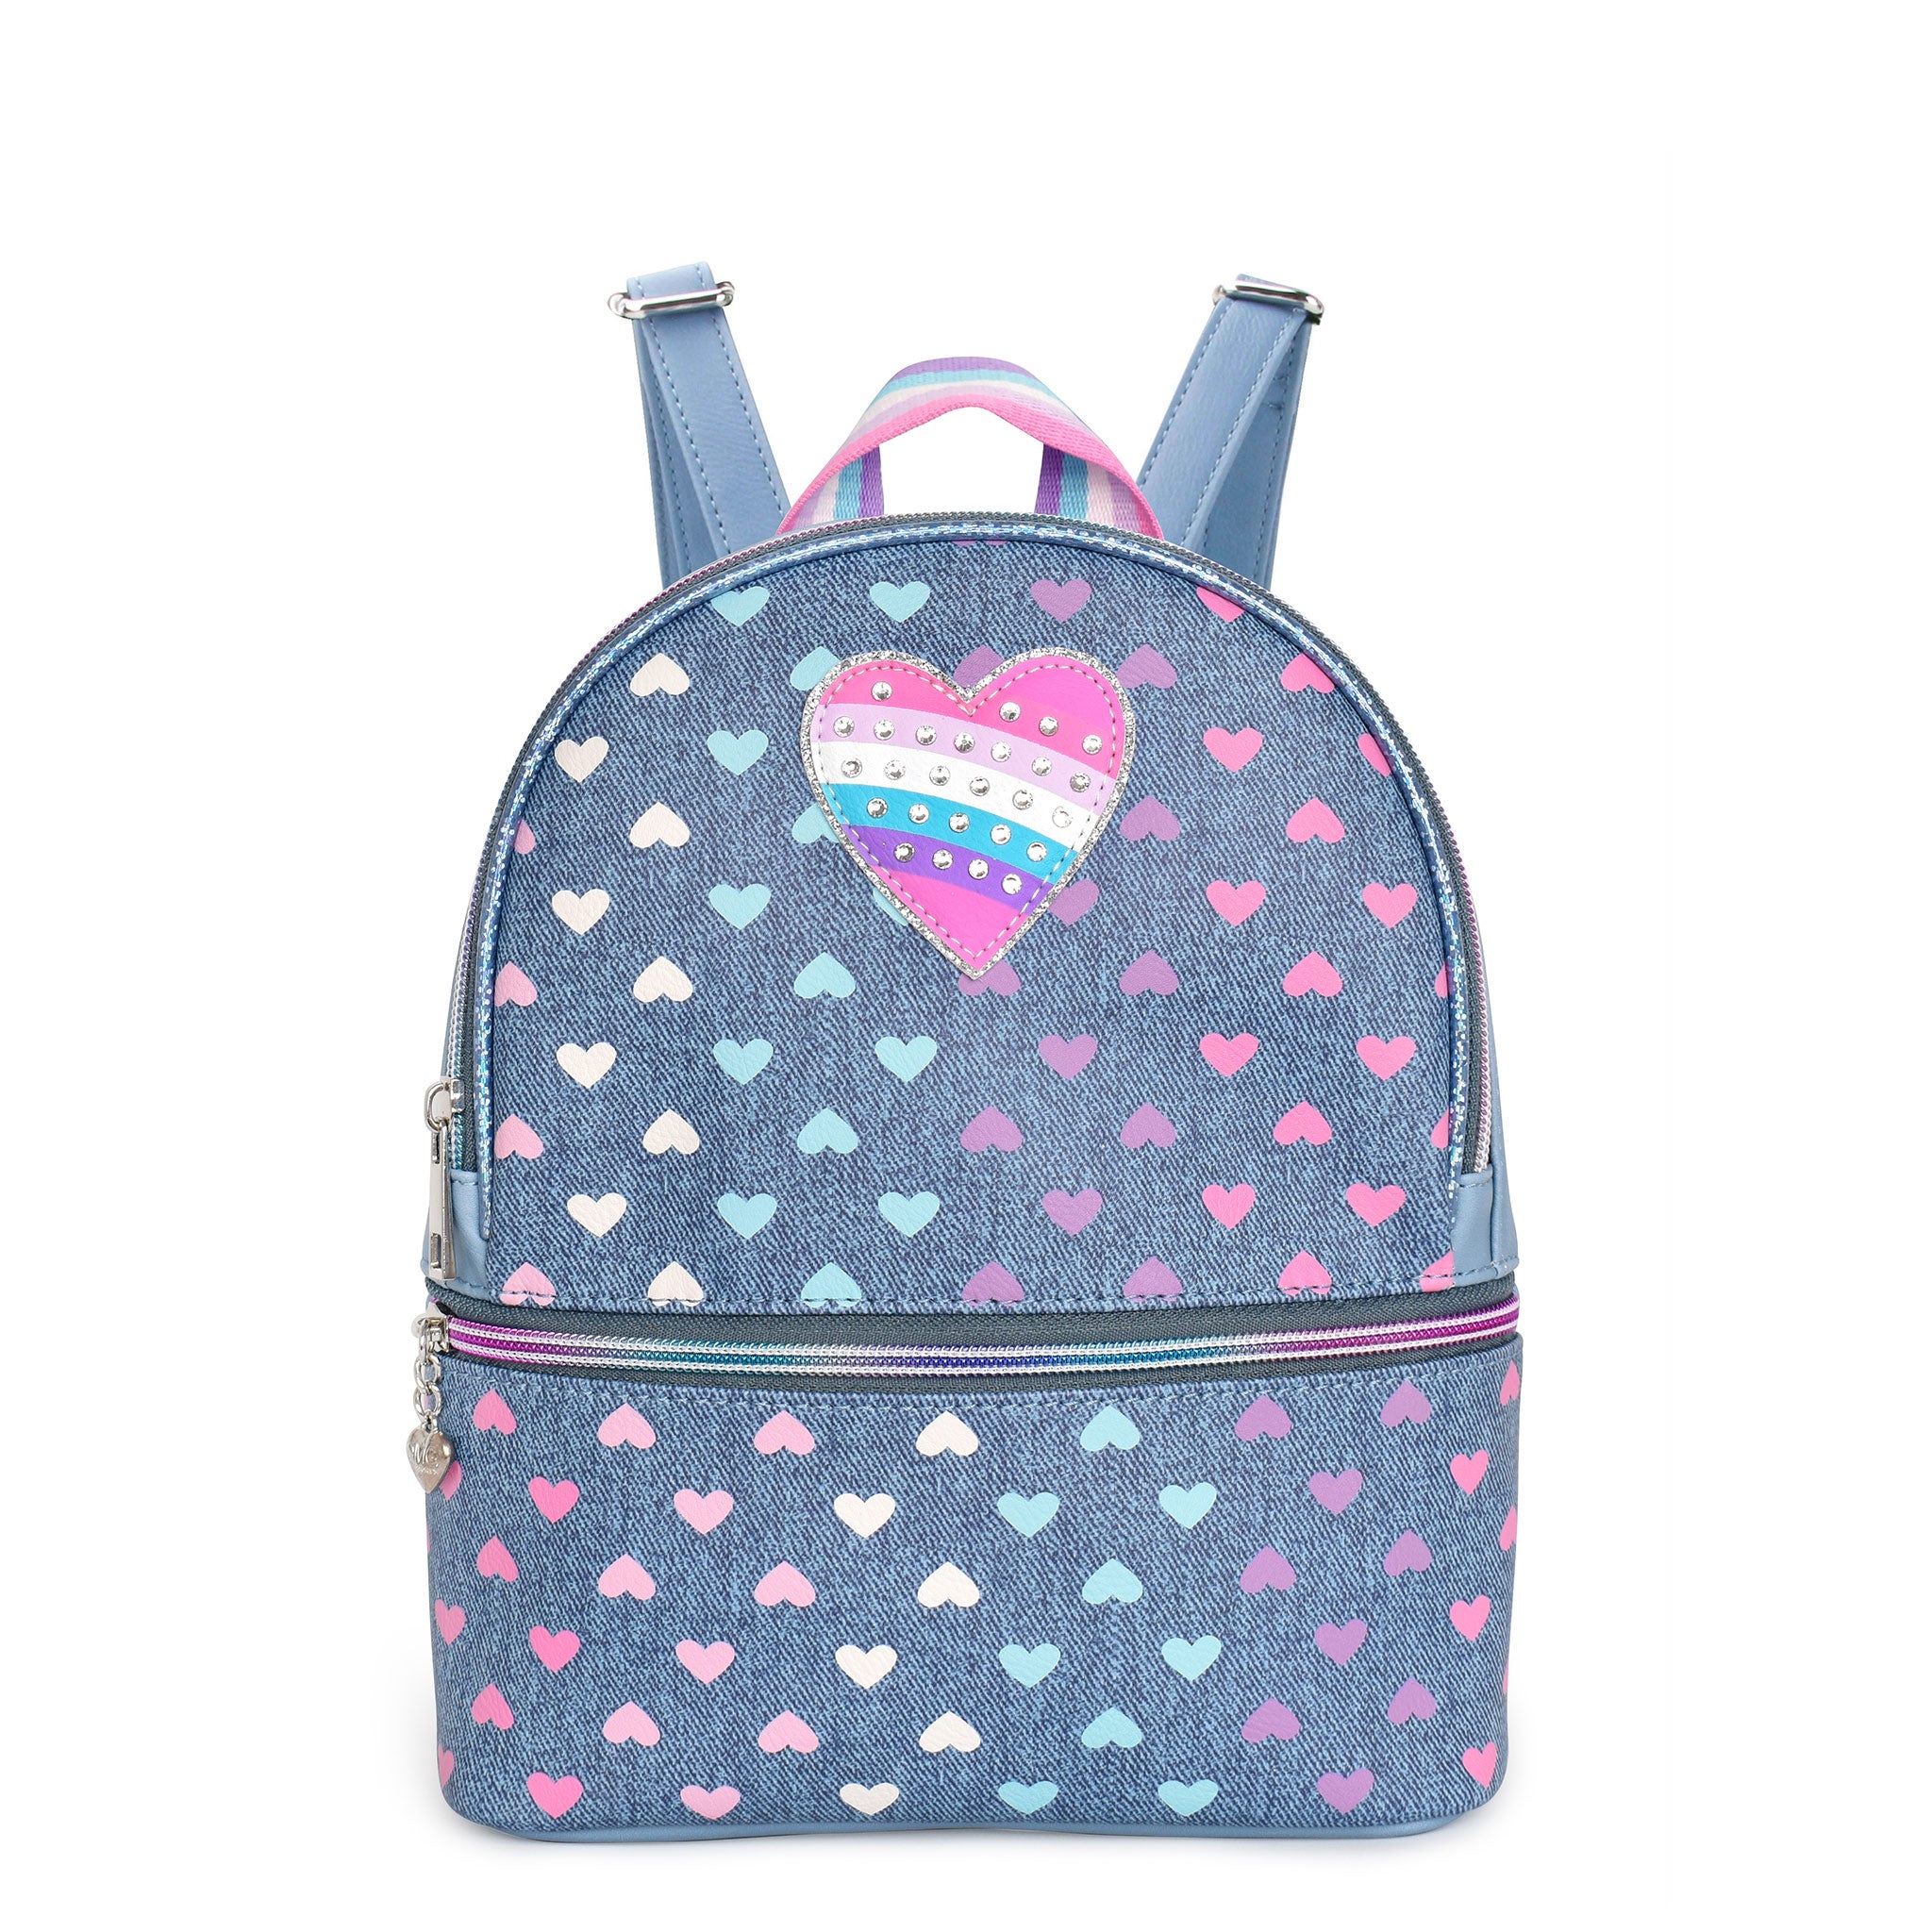 Front view of a denim mini backpack covered in a heart print and embellished with a heart patch appliqué